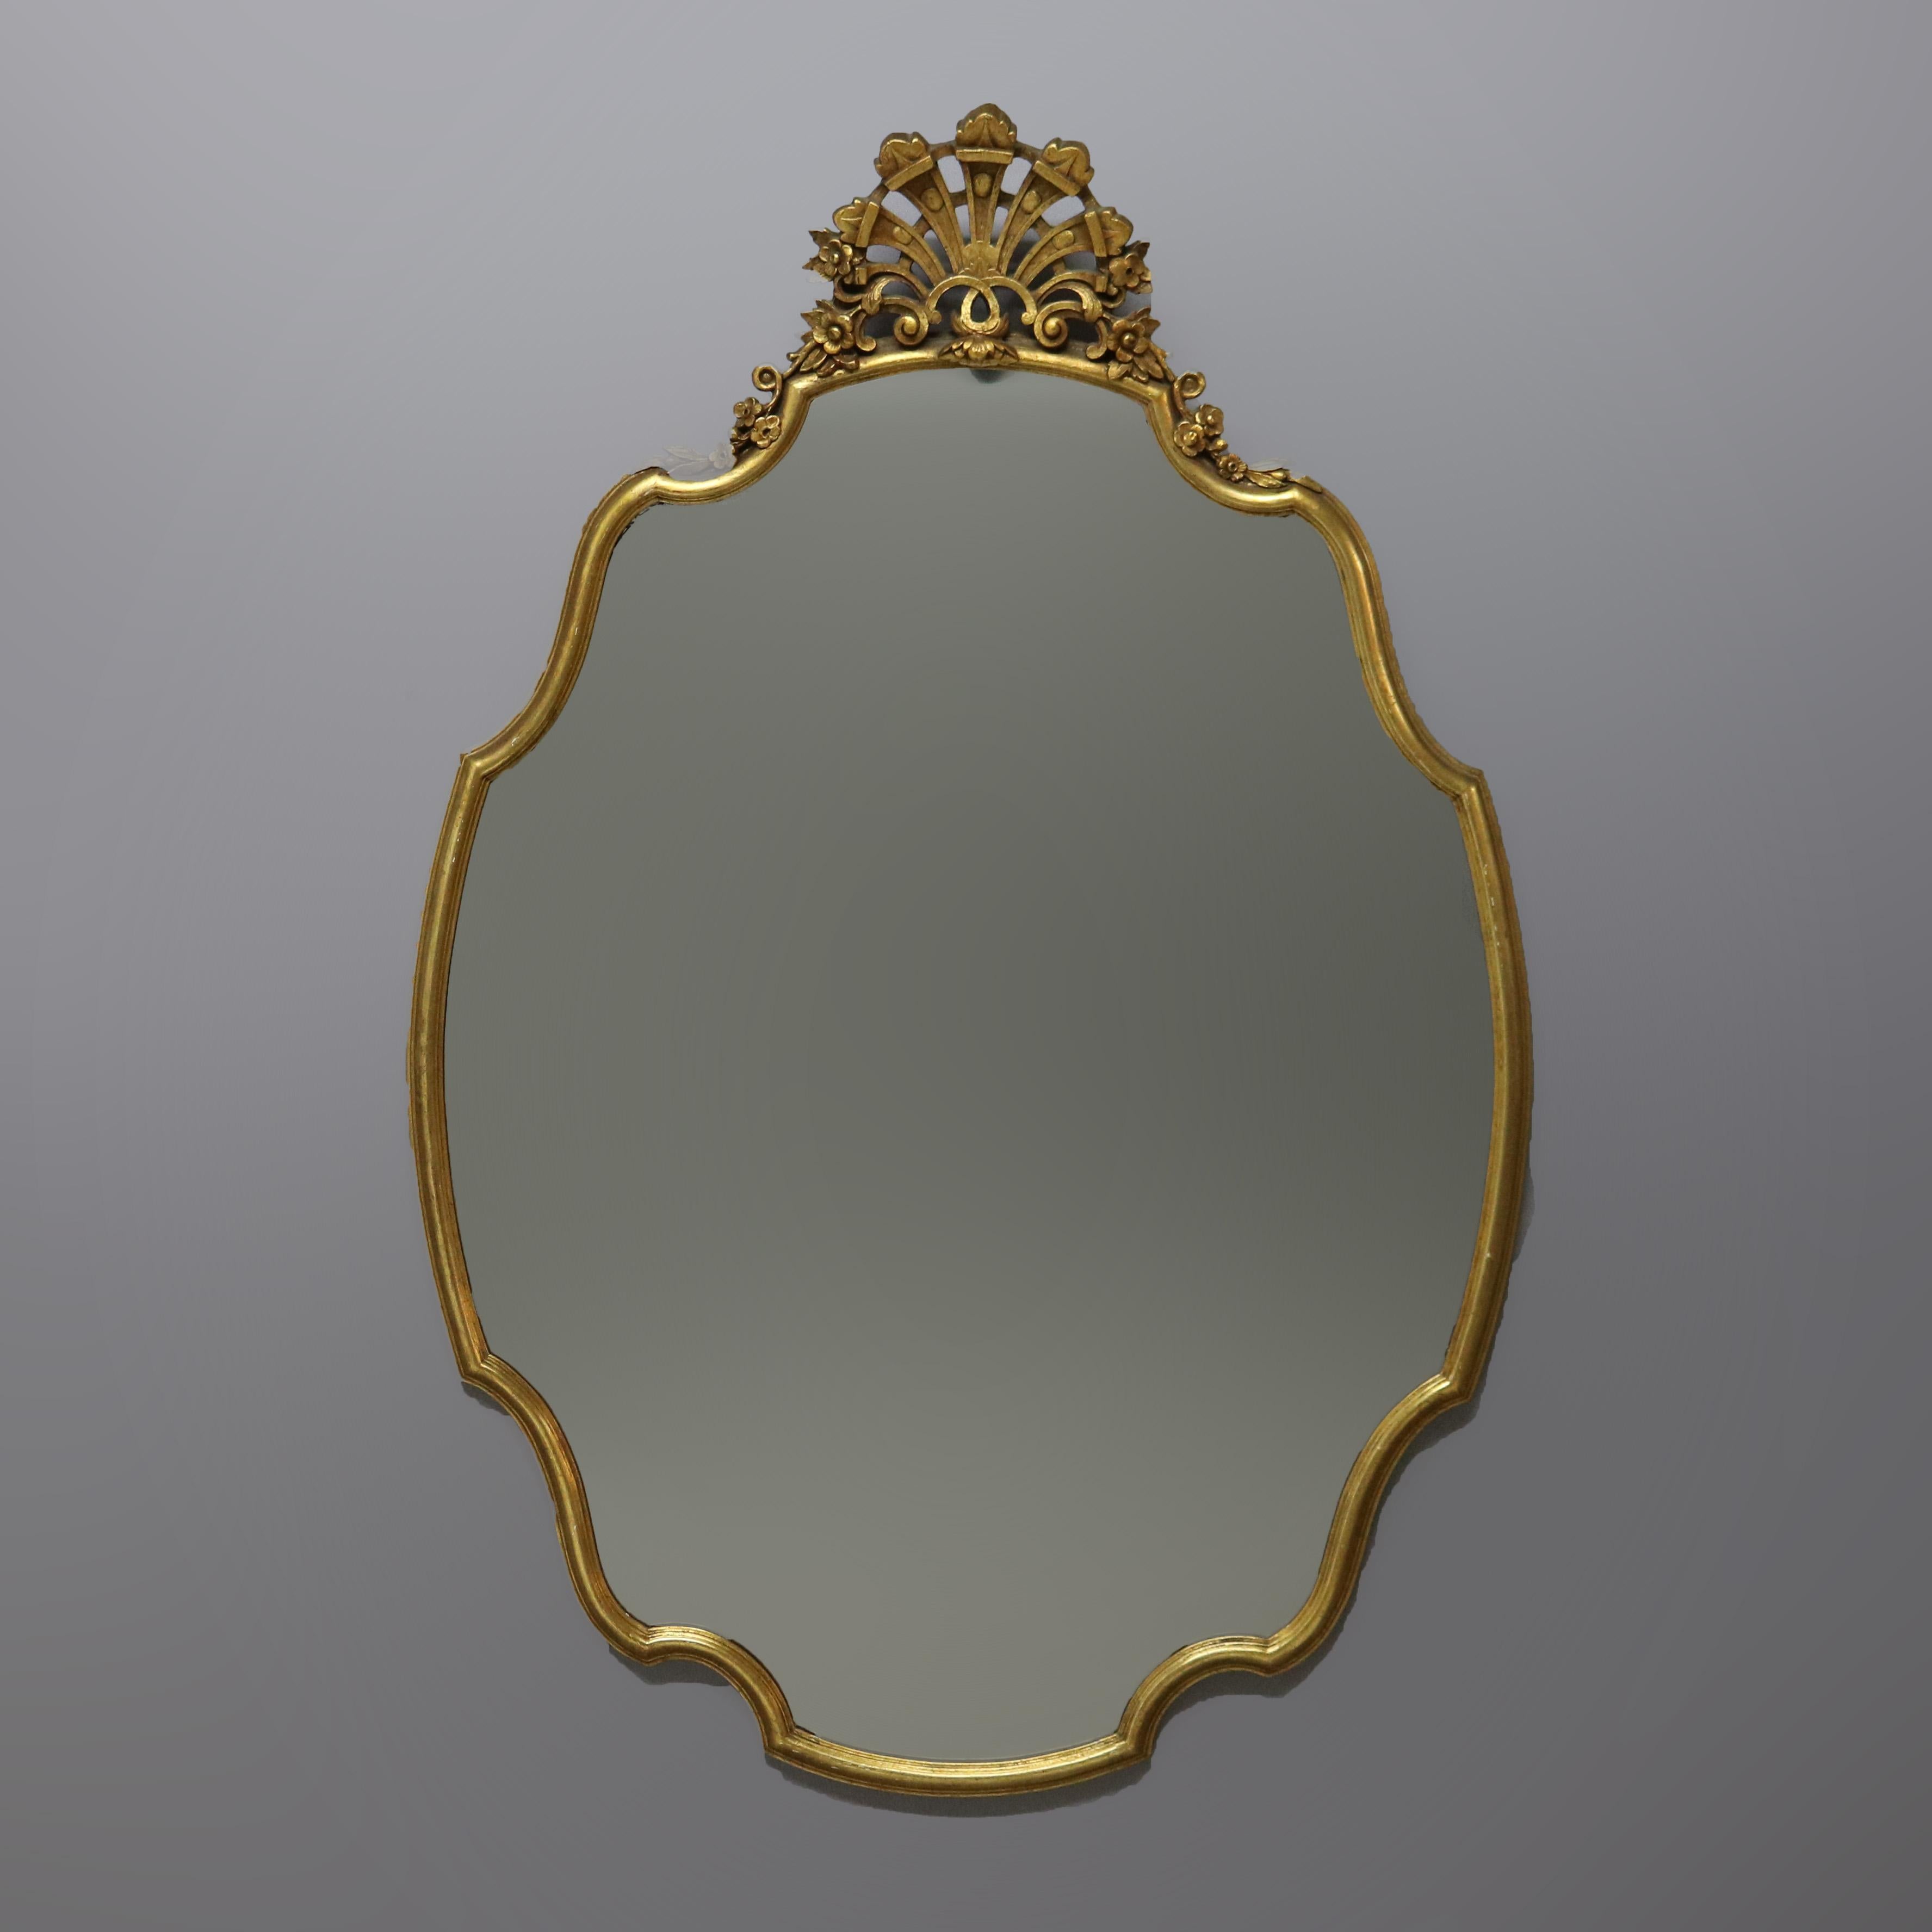 An antique pair of matching French style wall mirrors offer giltwood construction with shaped mirrors having reticulated foliate crests, c1930.

Measures- 47.25''H x 31.5''W x 3.5''D

Catalogue Note: Ask about DISCOUNTED DELIVERY RATES available to